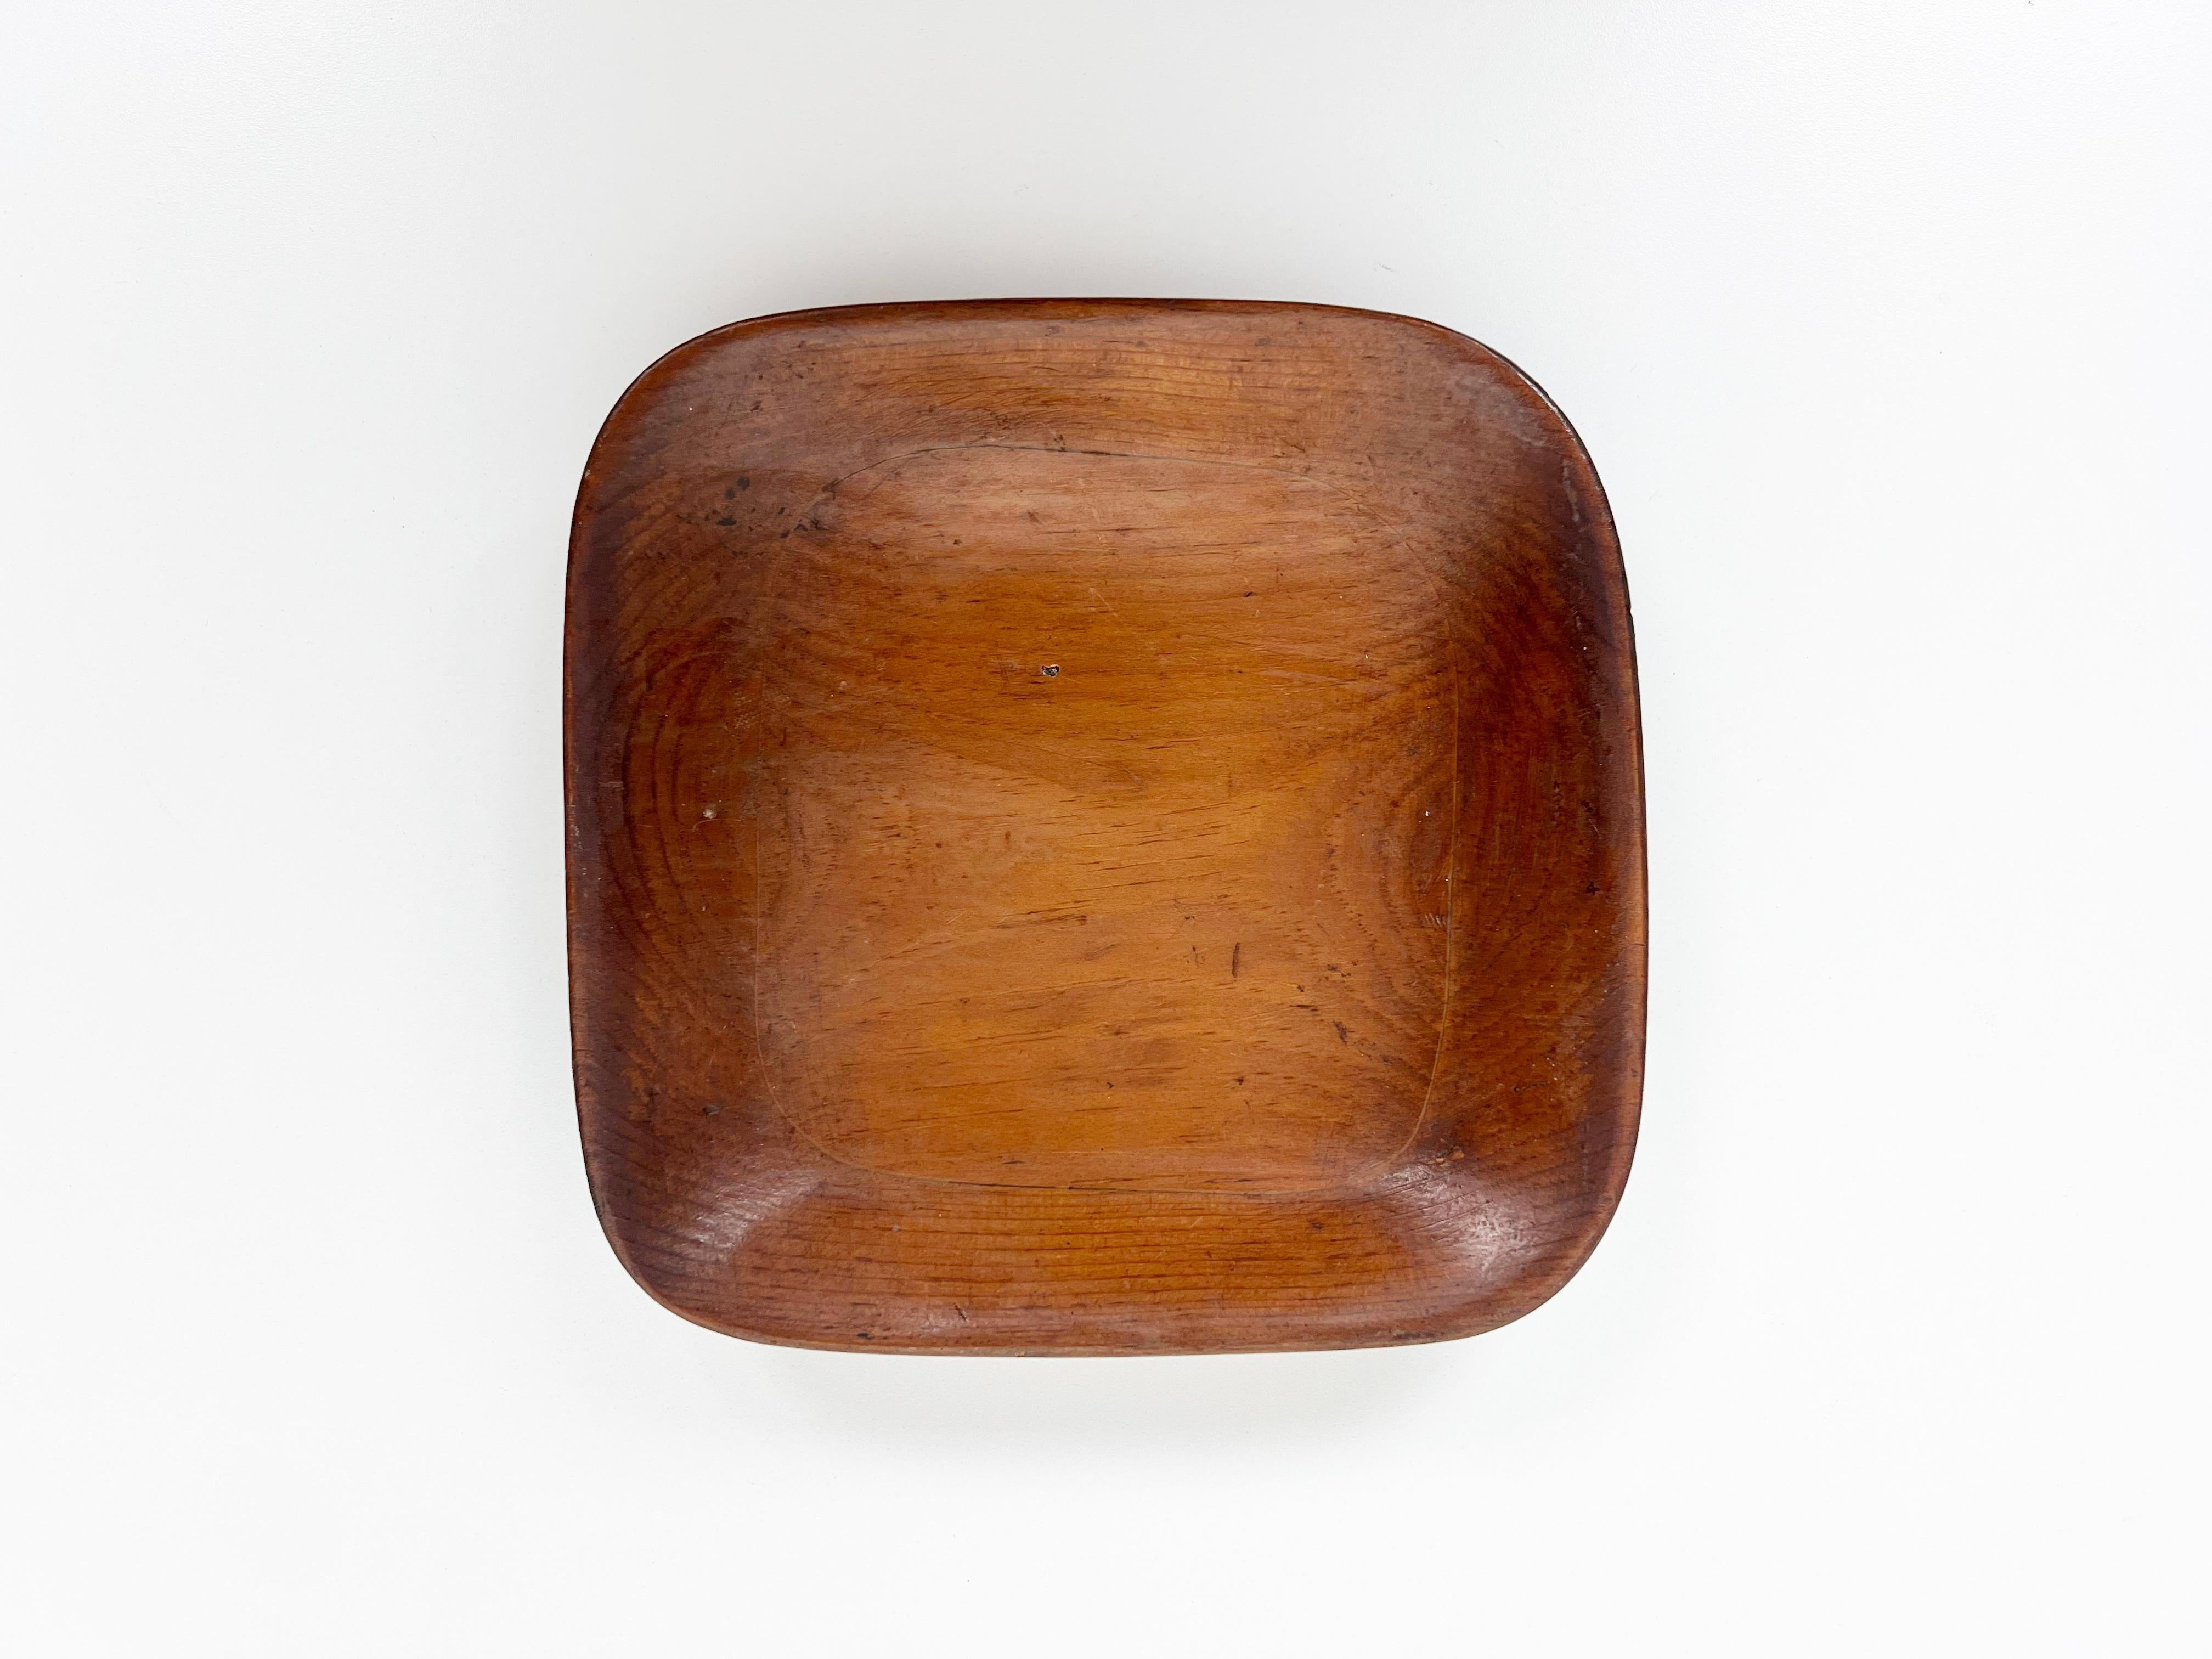 Vintage hand-carved primitive square wooden bowl.

Year: 1930s-40s

Style: Rustic Primitive

Dimensions: 8.5